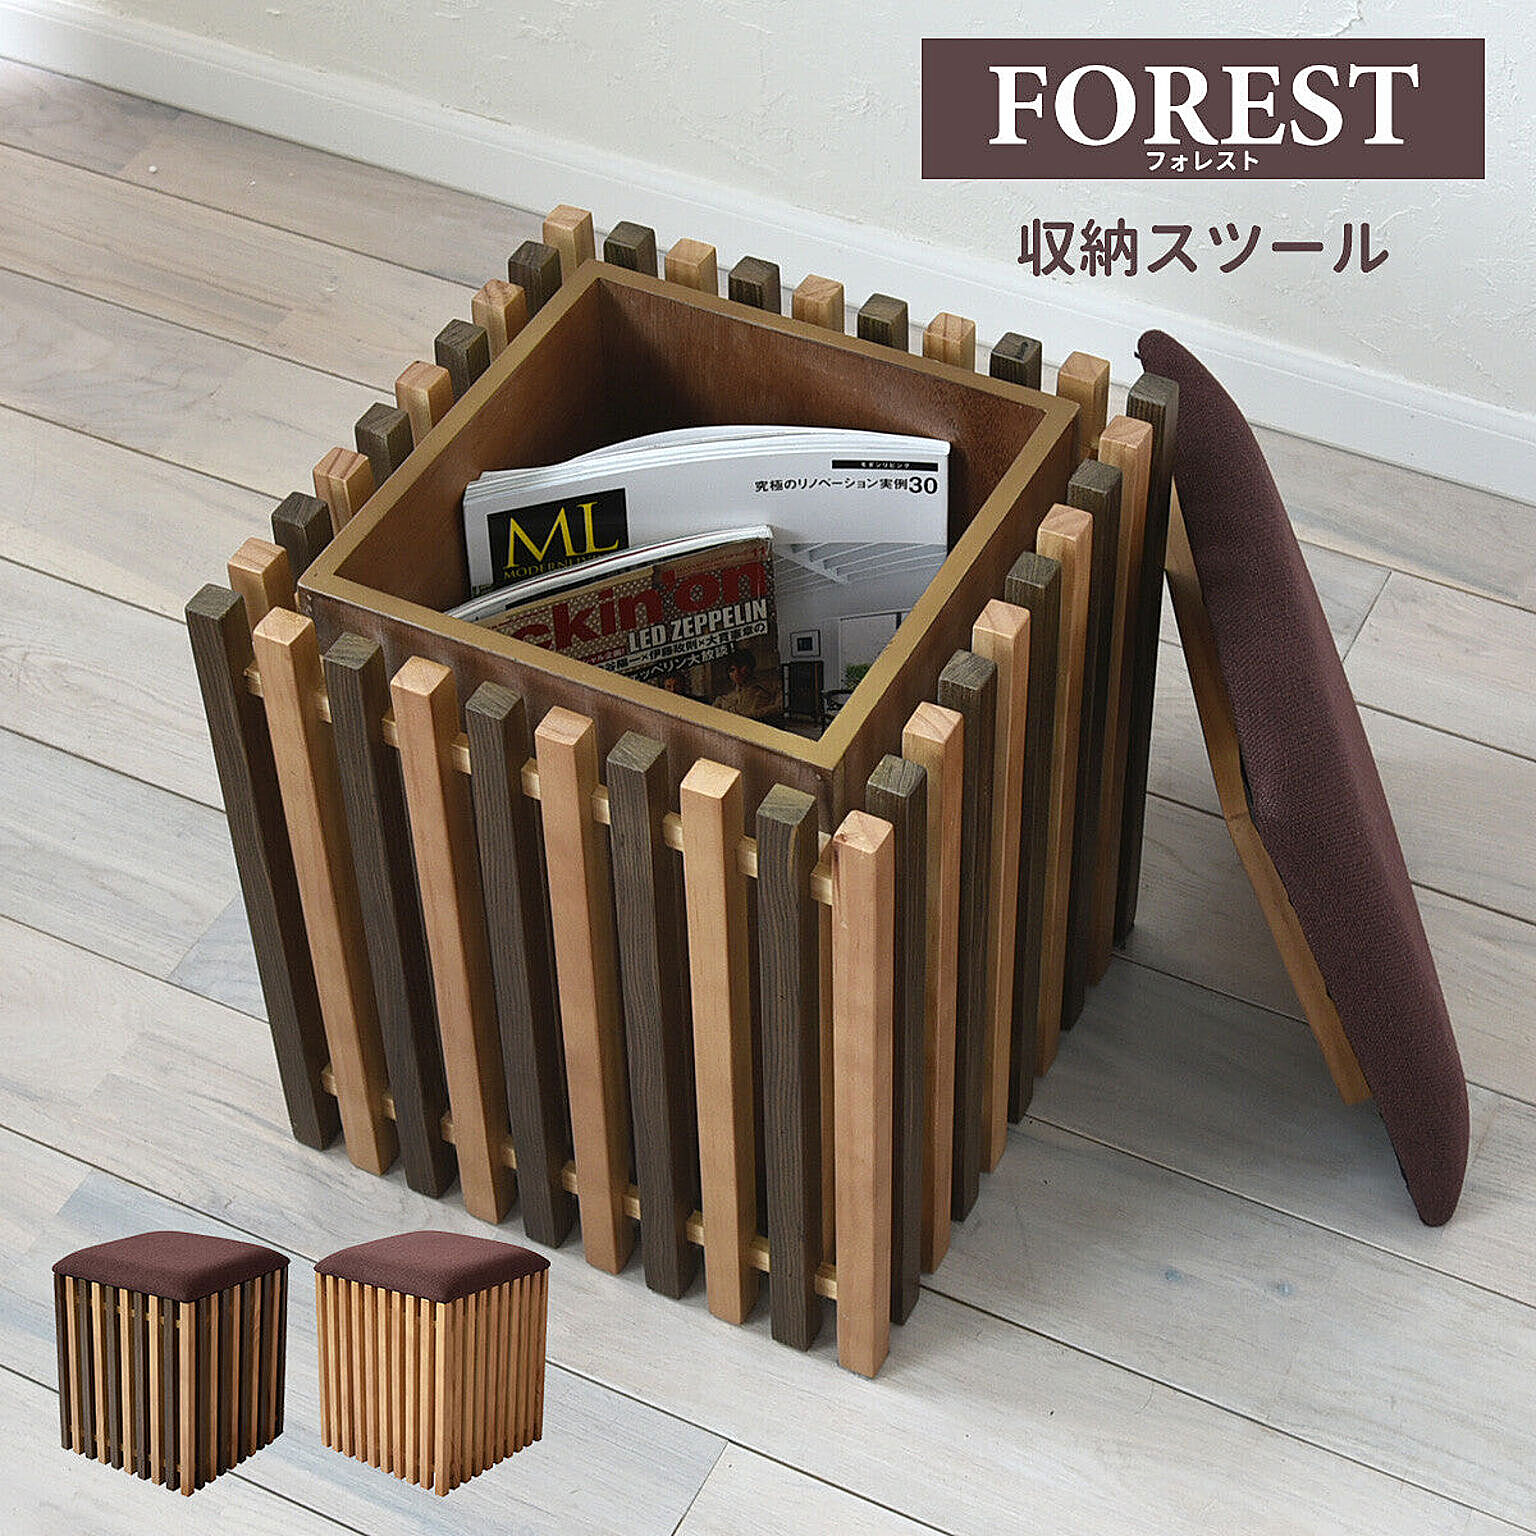 FOREST　収納スツール